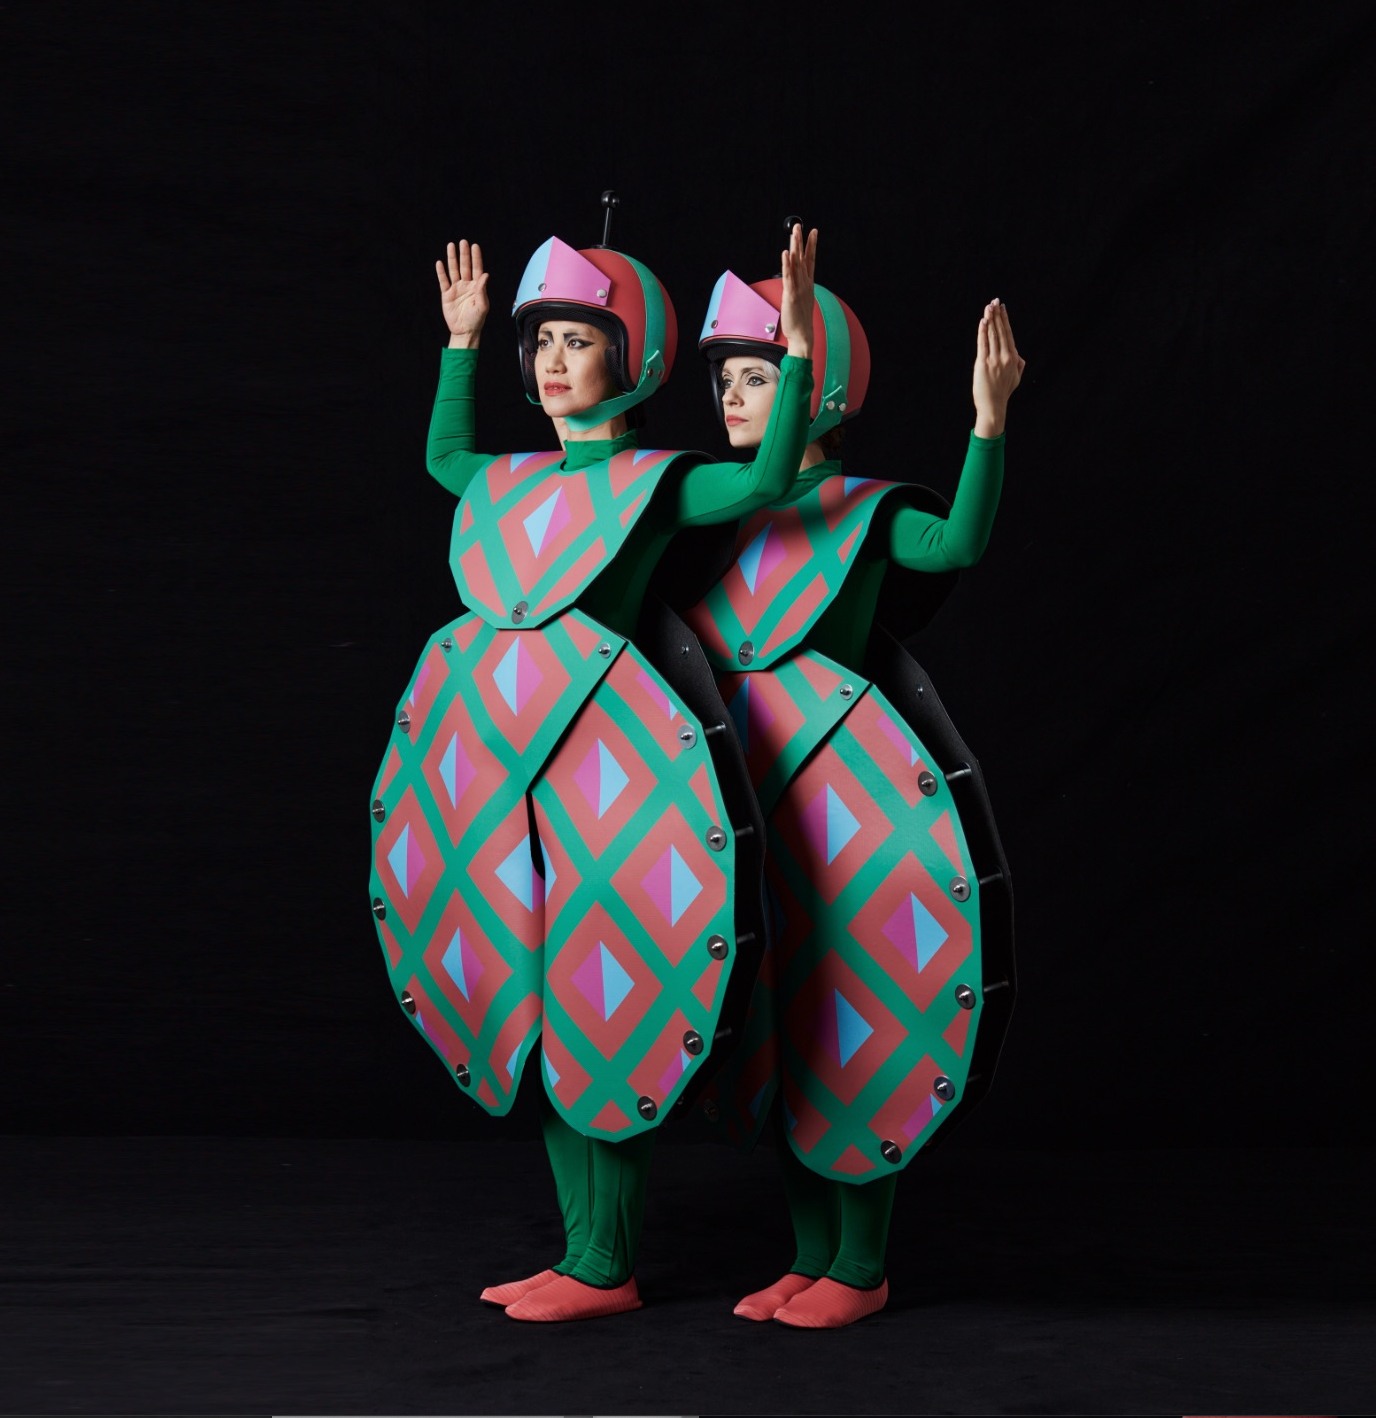 an example of Di Mainstone's costume work on a black background showing two women dressed in a green and pink costume